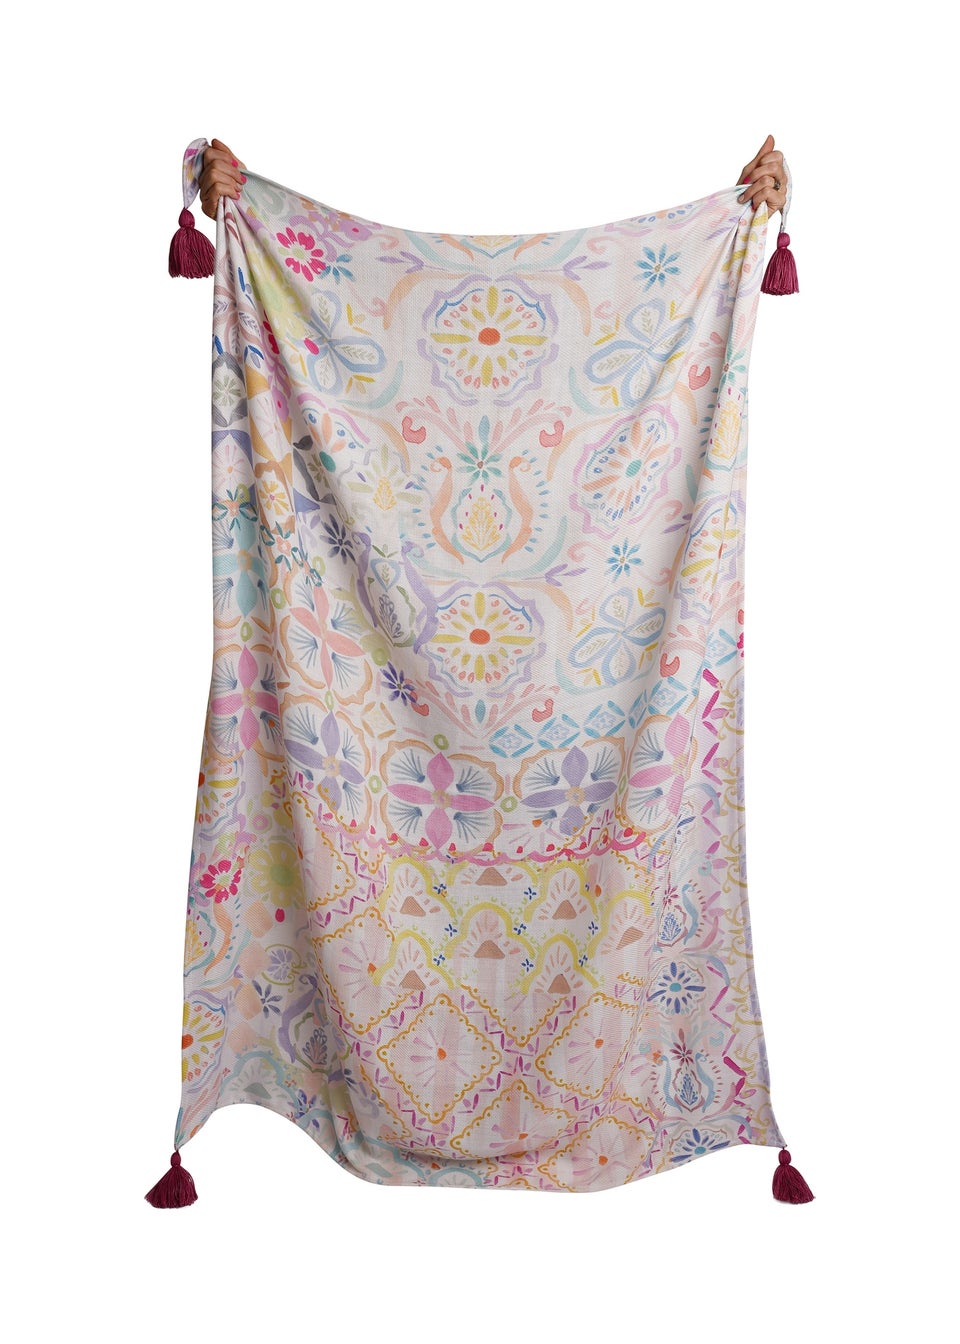 Appletree Style Casablanca Responsibly Sourced Throw